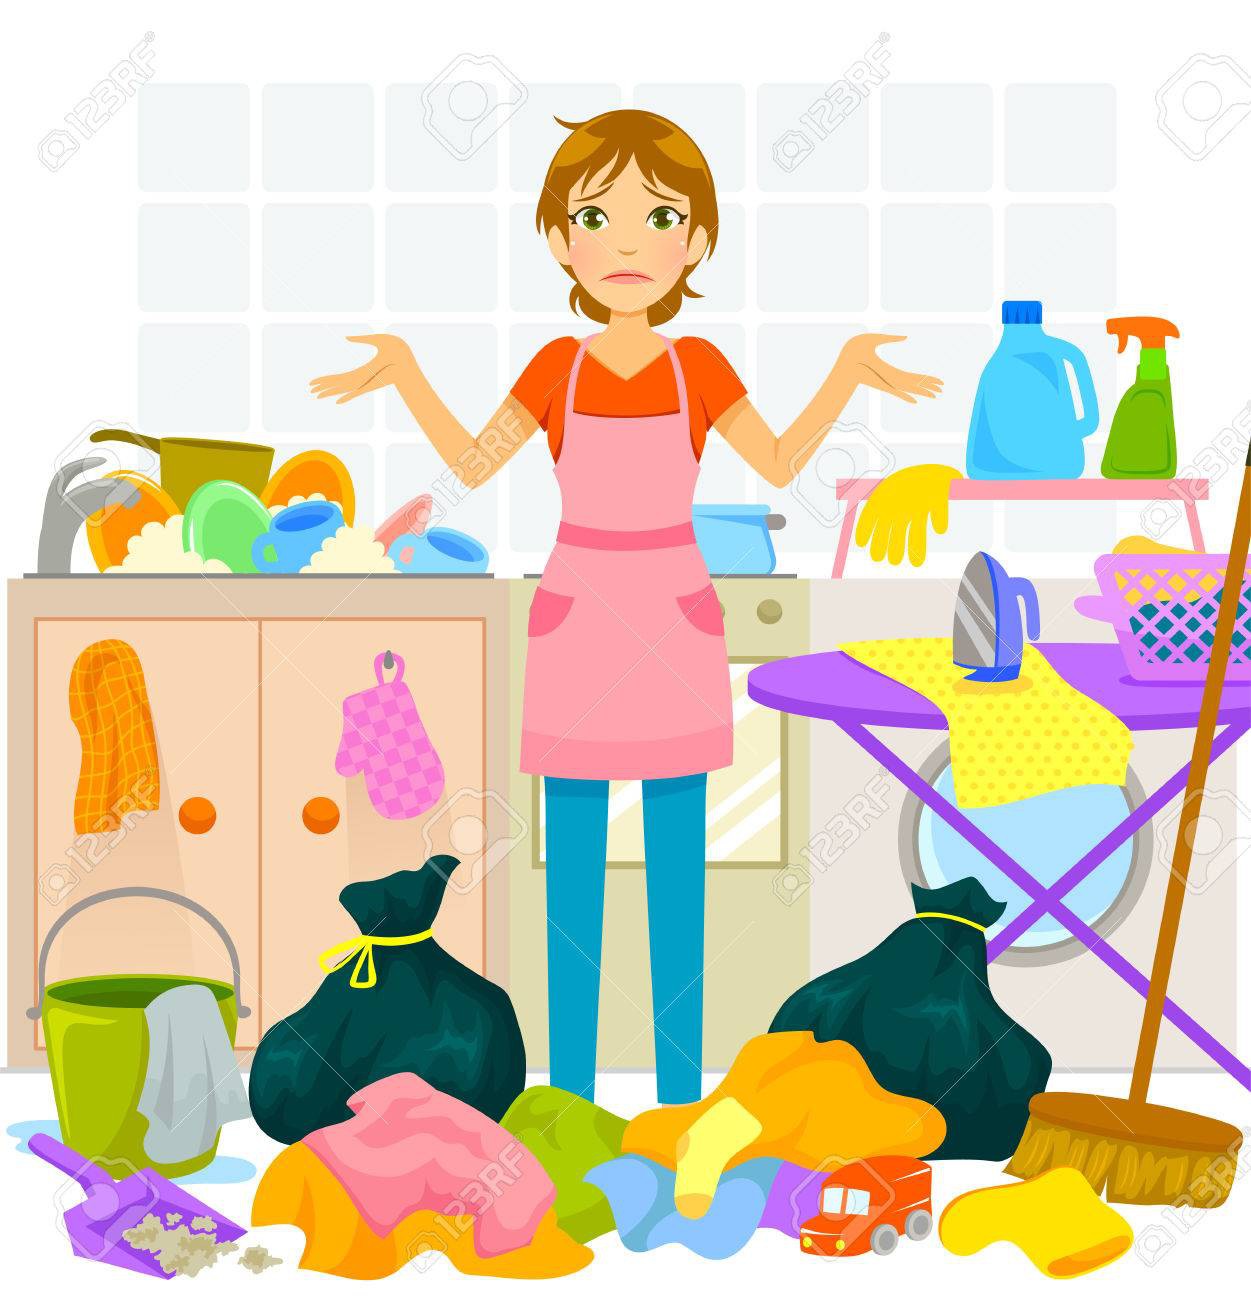 62331230-young-woman-overwhelmed-by-too-much-housework